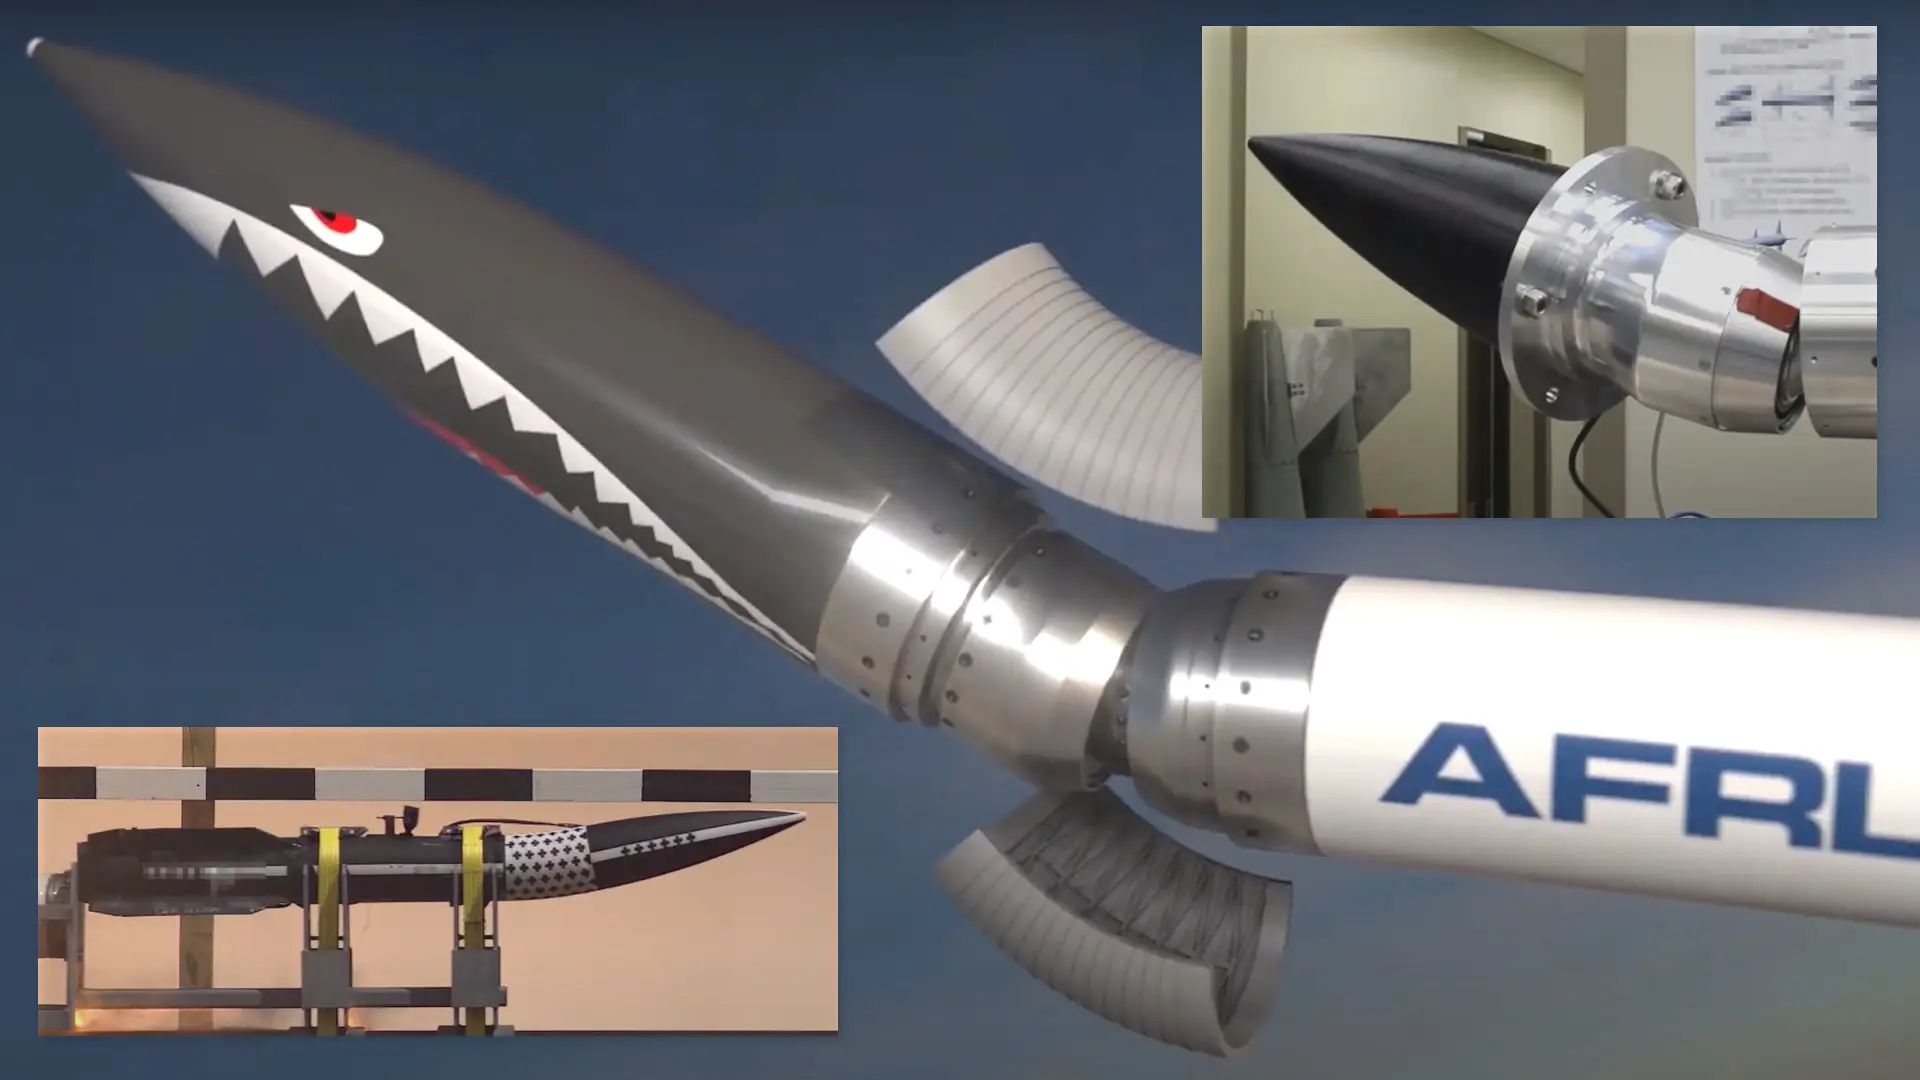 US Air Force tests mutant missile with a bent nose for sixth-generation fighter jet and to counter hypersonic weapons